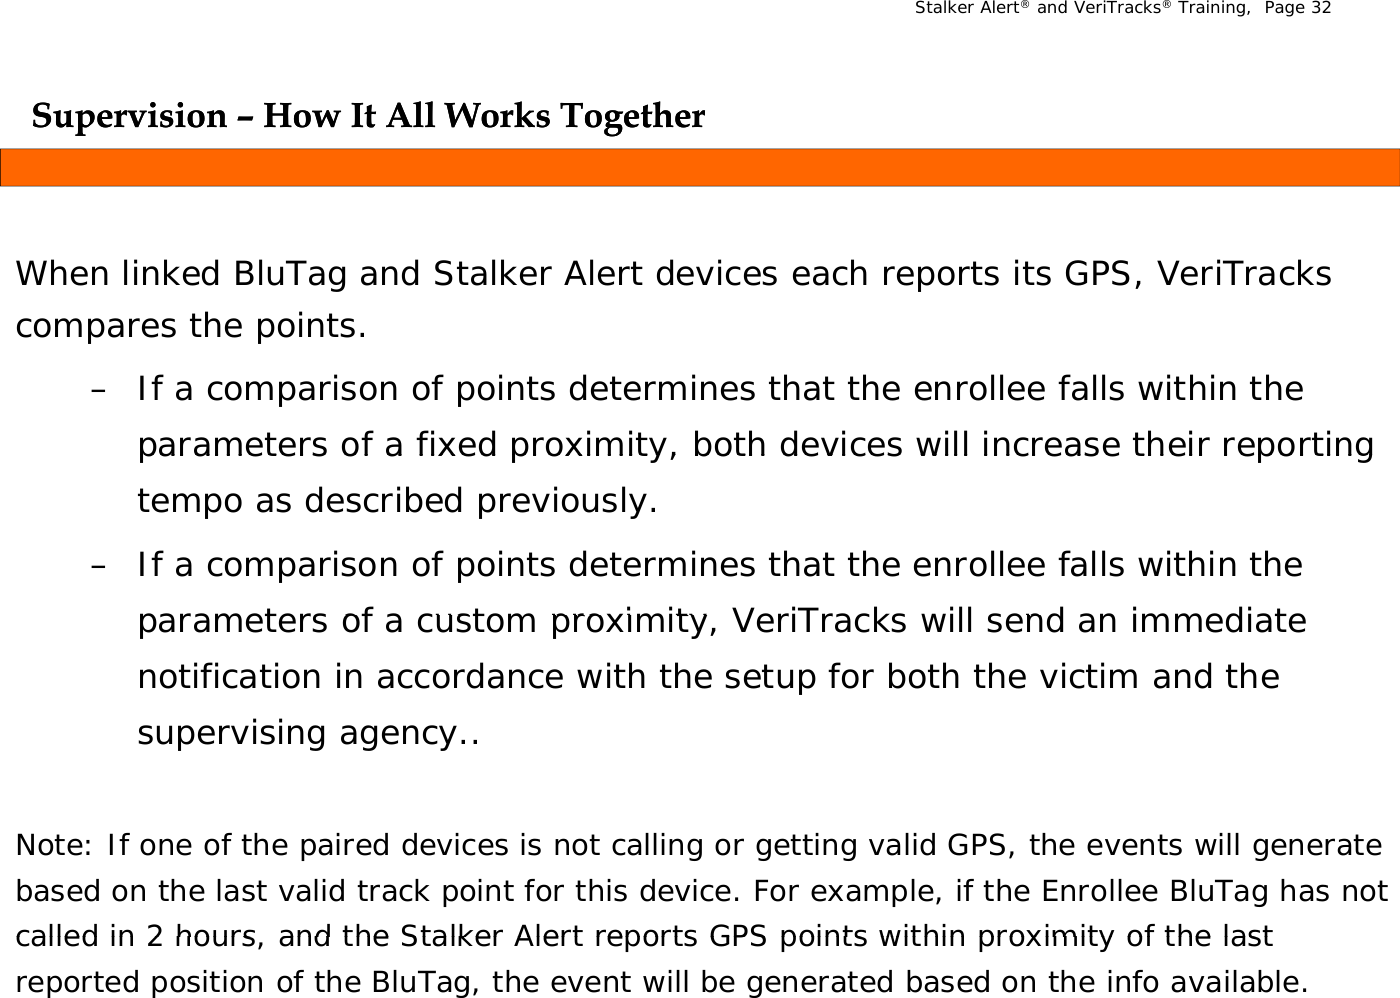 Stalker Alert®and VeriTracks®Training,  Page 32Supervision Supervision –– How It All Works TogetherHow It All Works TogetherppggWhen linked BluTag and Stalker Alert devices each reports its GPS, VeriTracks compares the points.  – If a comparison of points determines that the enrollee falls within the parameters of a fixed proximity, both devices will increase their reporting parameters of a fixed proximity, both devices will increase their reporting tempo as described previously.– If a comparison of points determines that the enrollee falls within the parameters of a custom proximity  VeriTracks will send an immediate parameters of a custom proximity, VeriTracks will send an immediate notification in accordance with the setup for both the victim and the supervising agency..Note: If one of the paired devices is not calling or getting valid GPS, the events will generate based on the last valid track point for this device. For example, if the Enrollee BluTag has not called in 2 hours  and the Stalker Alert reports GPS points within proximity of the last called in 2 hours, and the Stalker Alert reports GPS points within proximity of the last reported position of the BluTag, the event will be generated based on the info available.